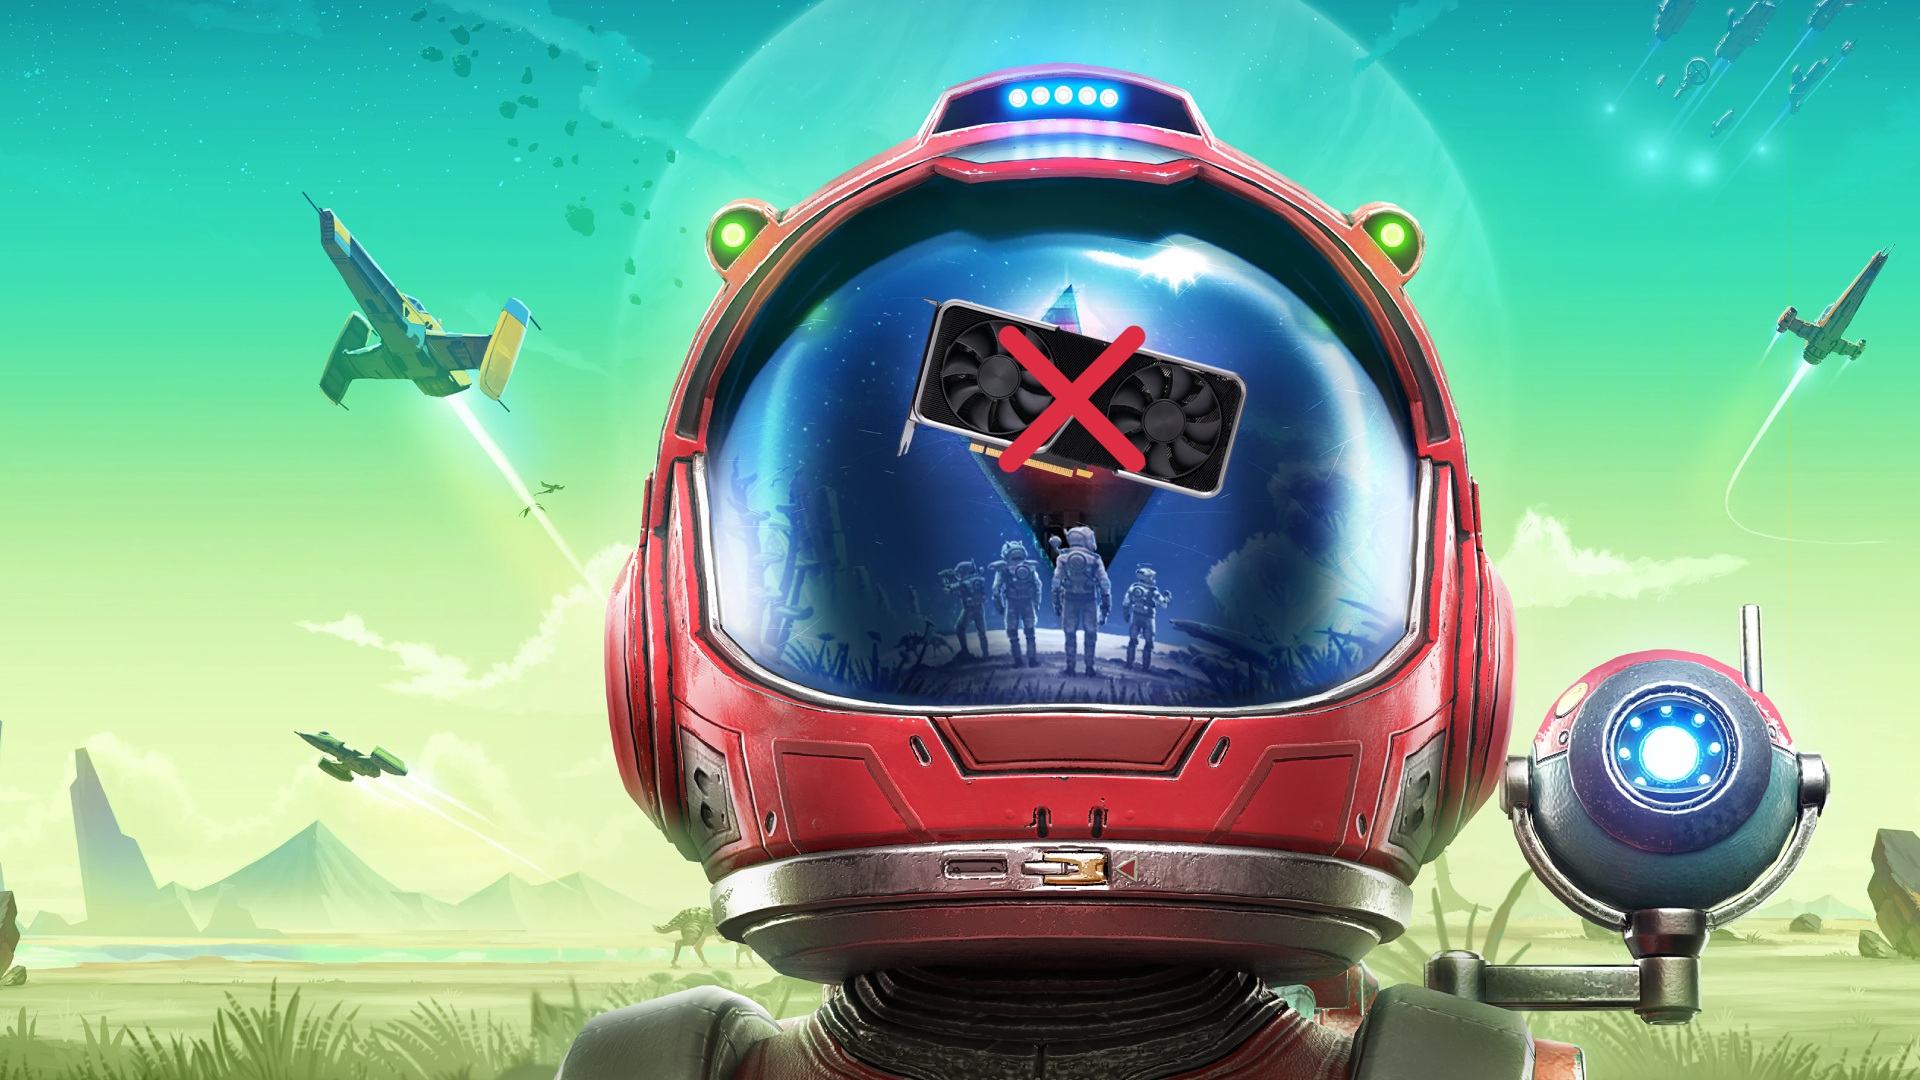 You can now explore No Man's Sky without a graphics card